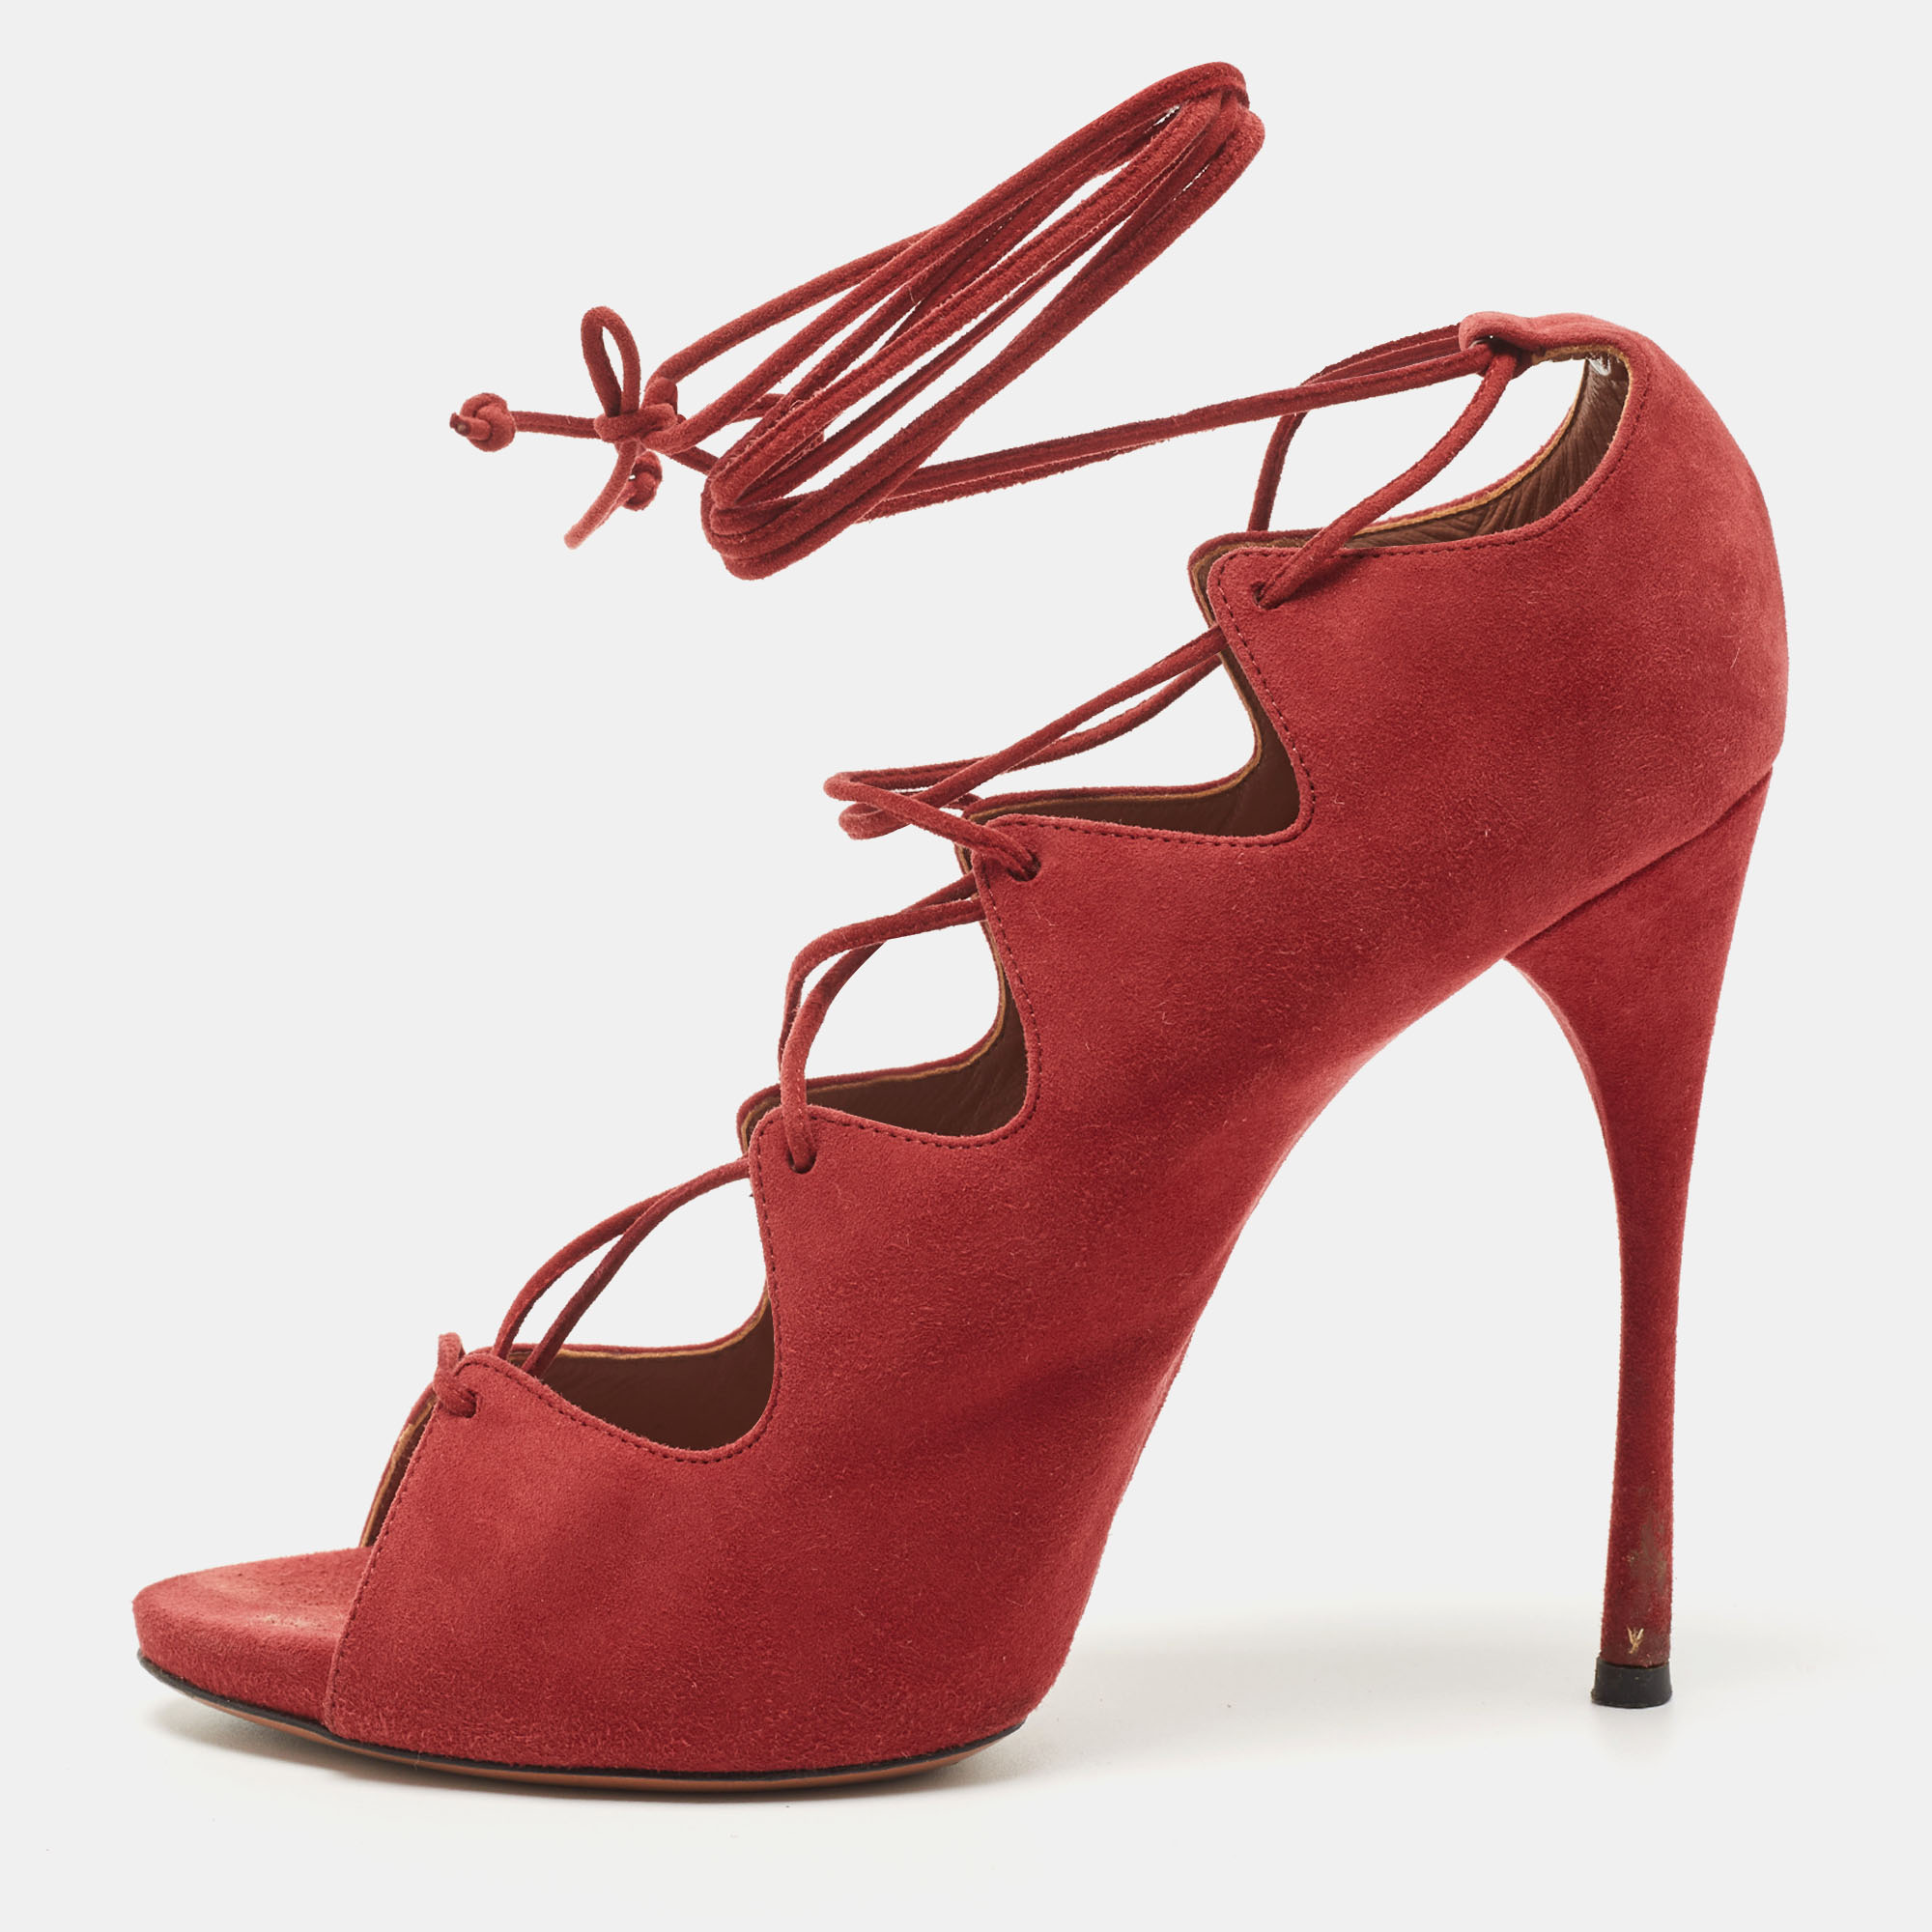 Alaia Red Suede Lace Up Pumps Size 39